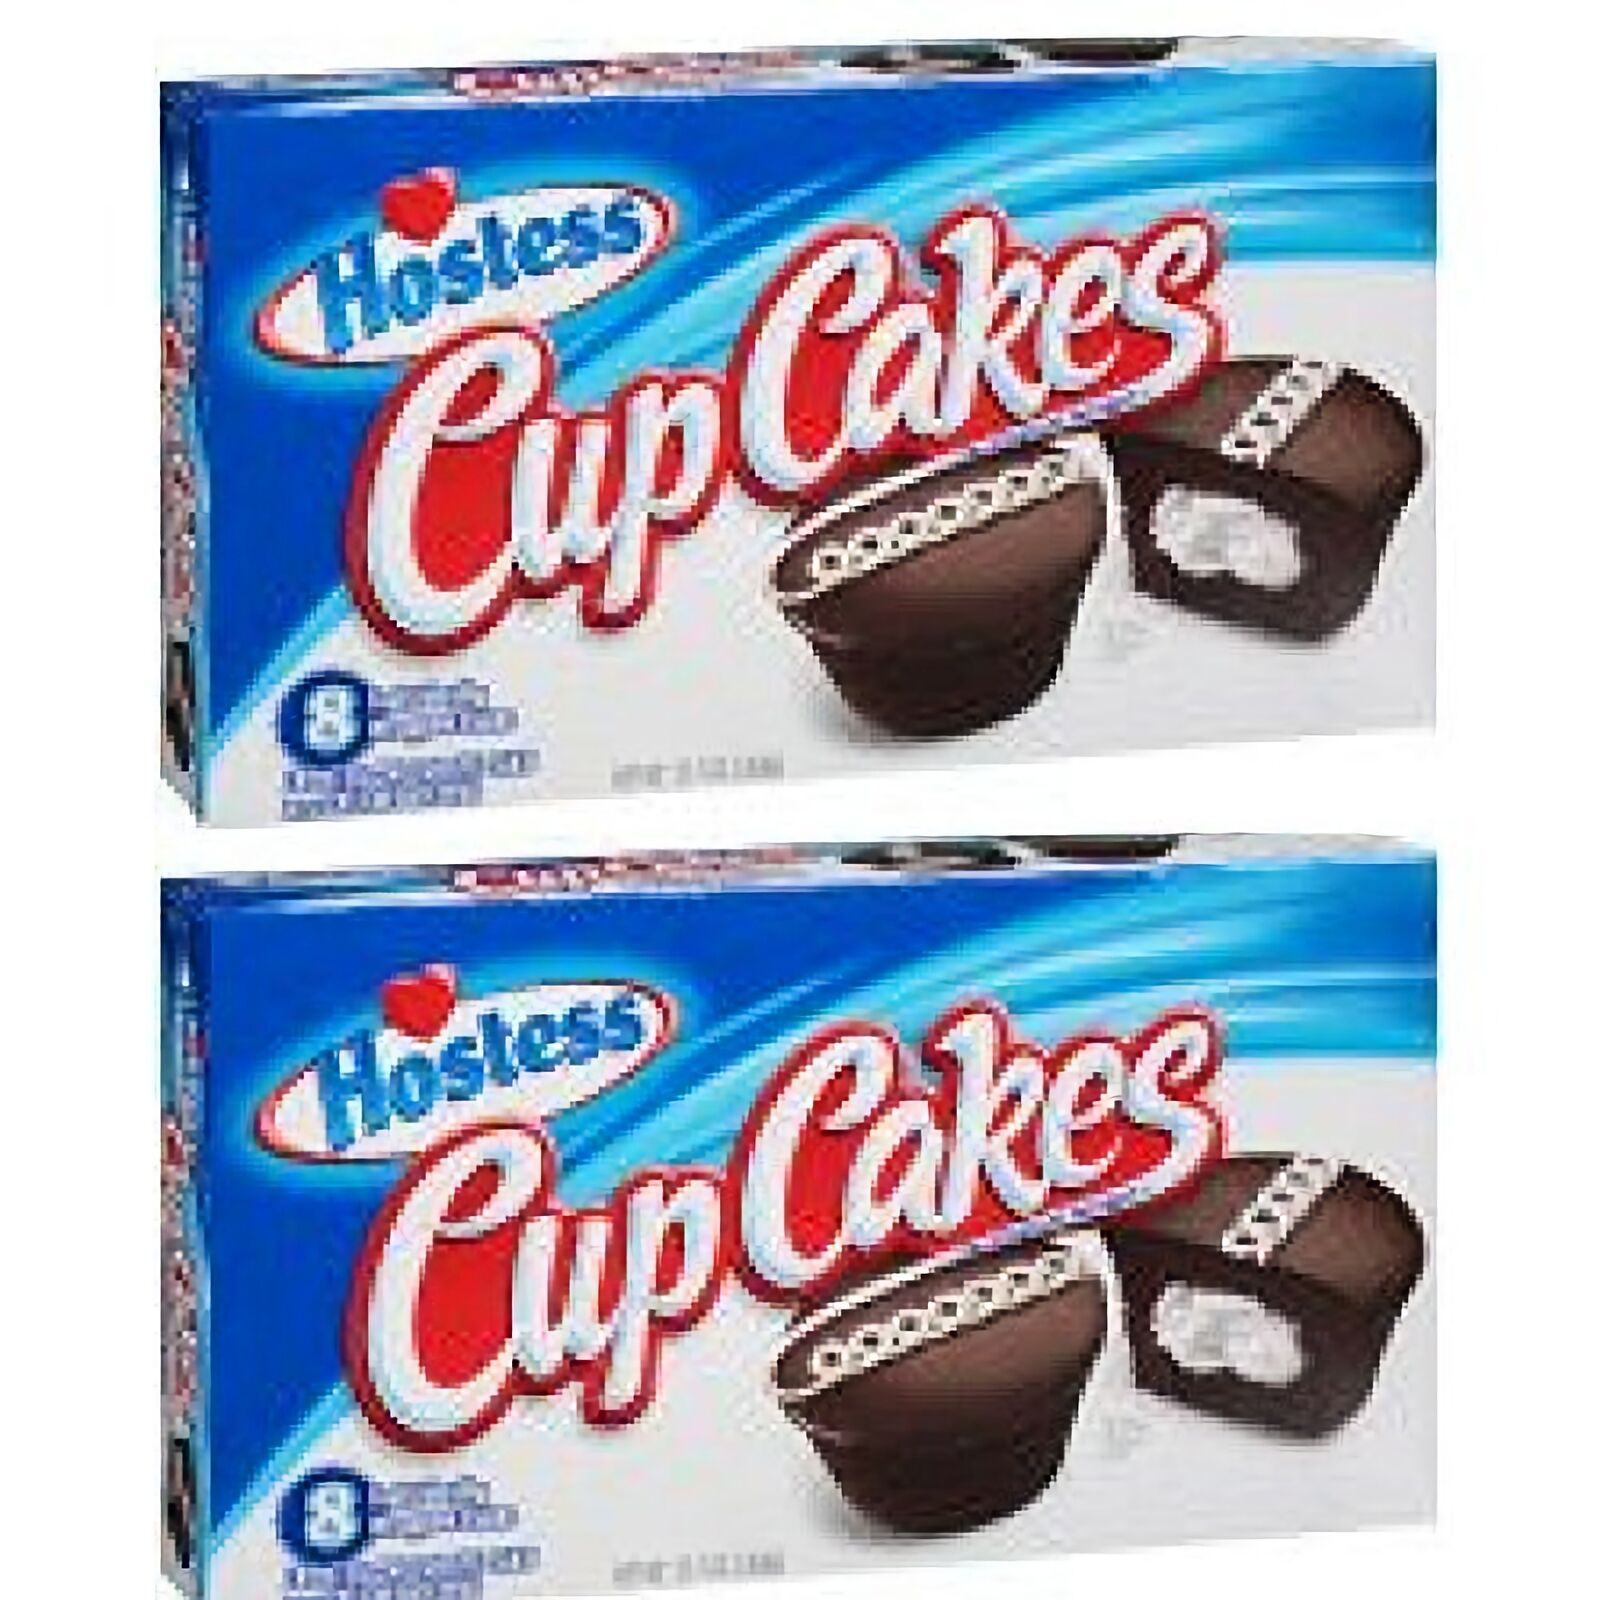 Hostess Chocolate Cupcakes 12.7 oz Box, Pack of 2 | 16 Cupcakes Total